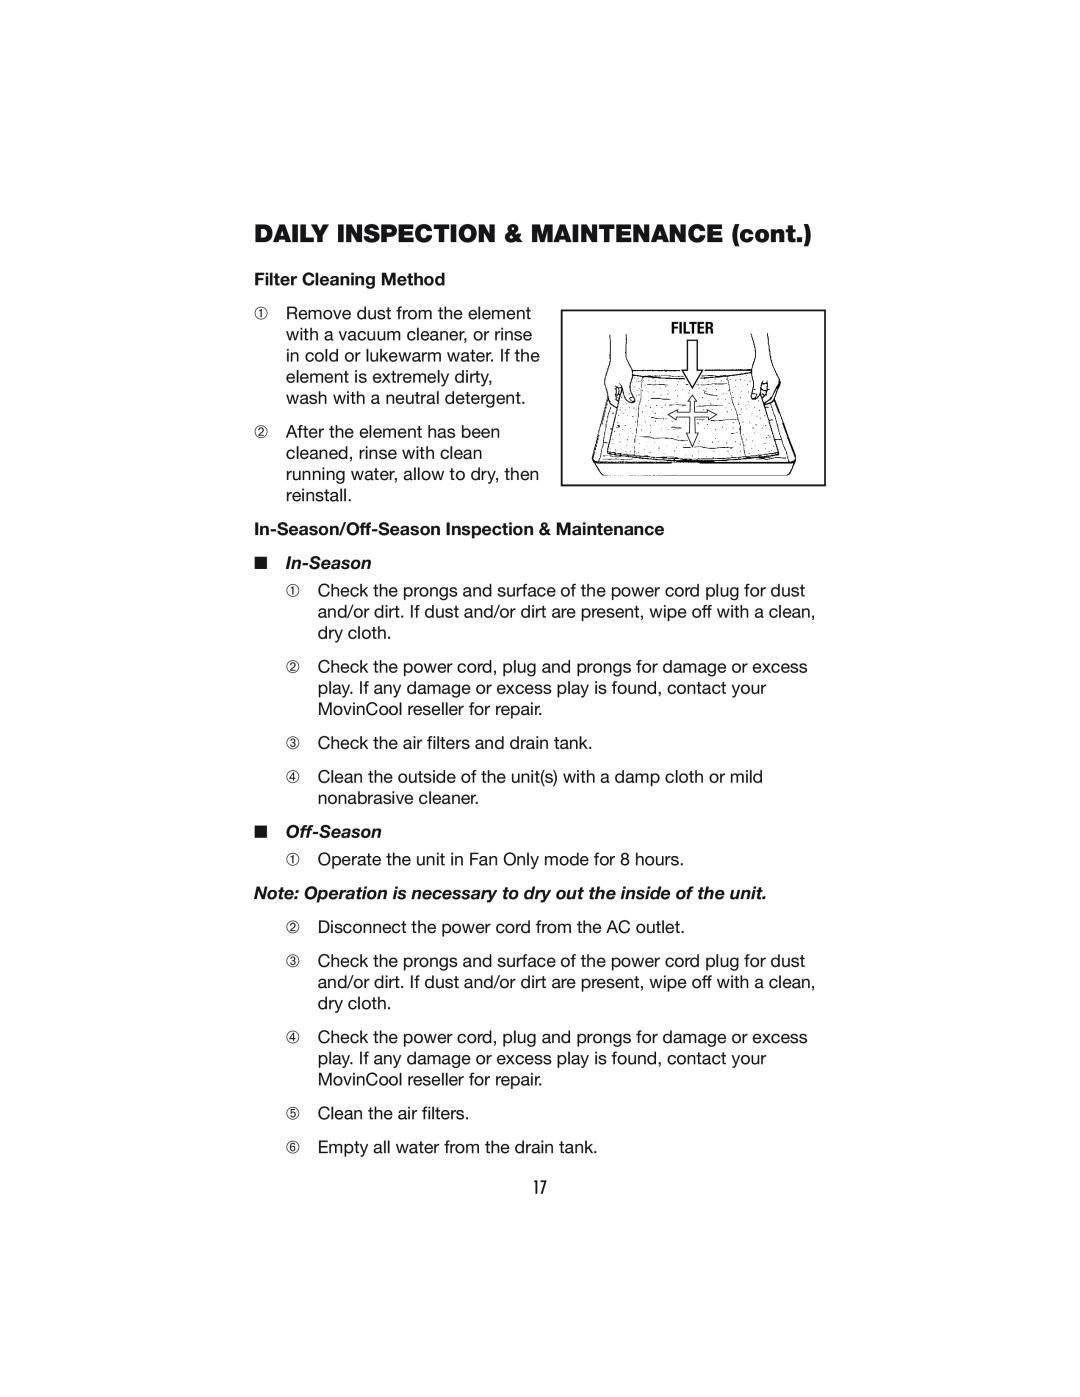 Denso PRO 18 DAILY INSPECTION & MAINTENANCE cont, Filter Cleaning Method, In-Season/Off-SeasonInspection & Maintenance 